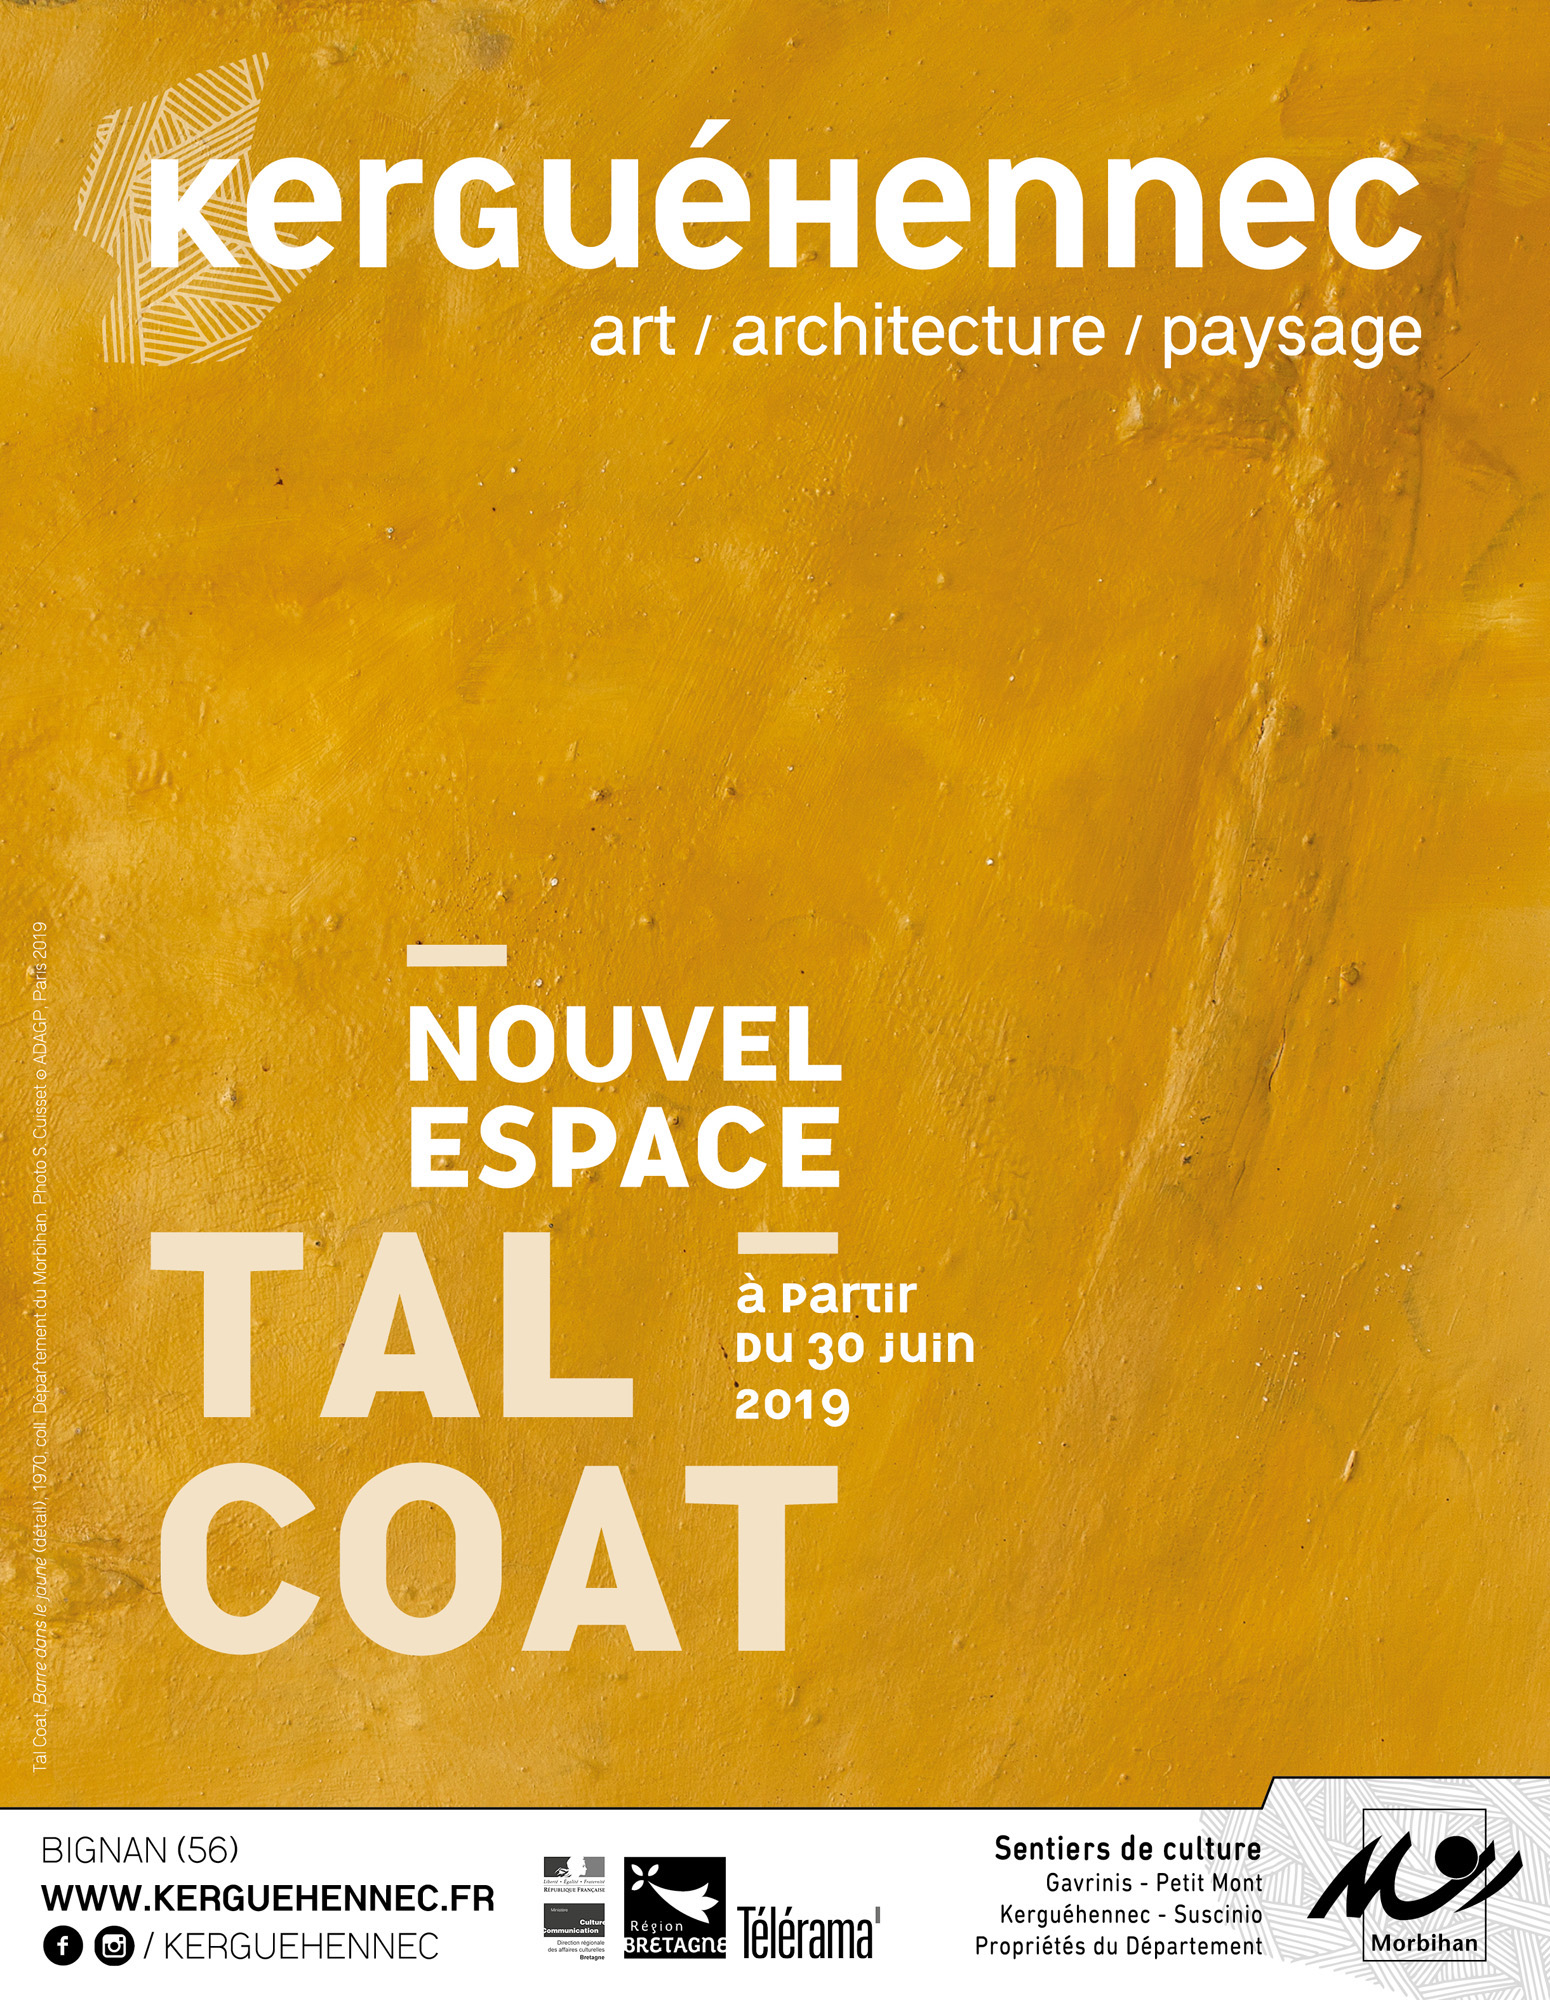 Image for Tal Coat